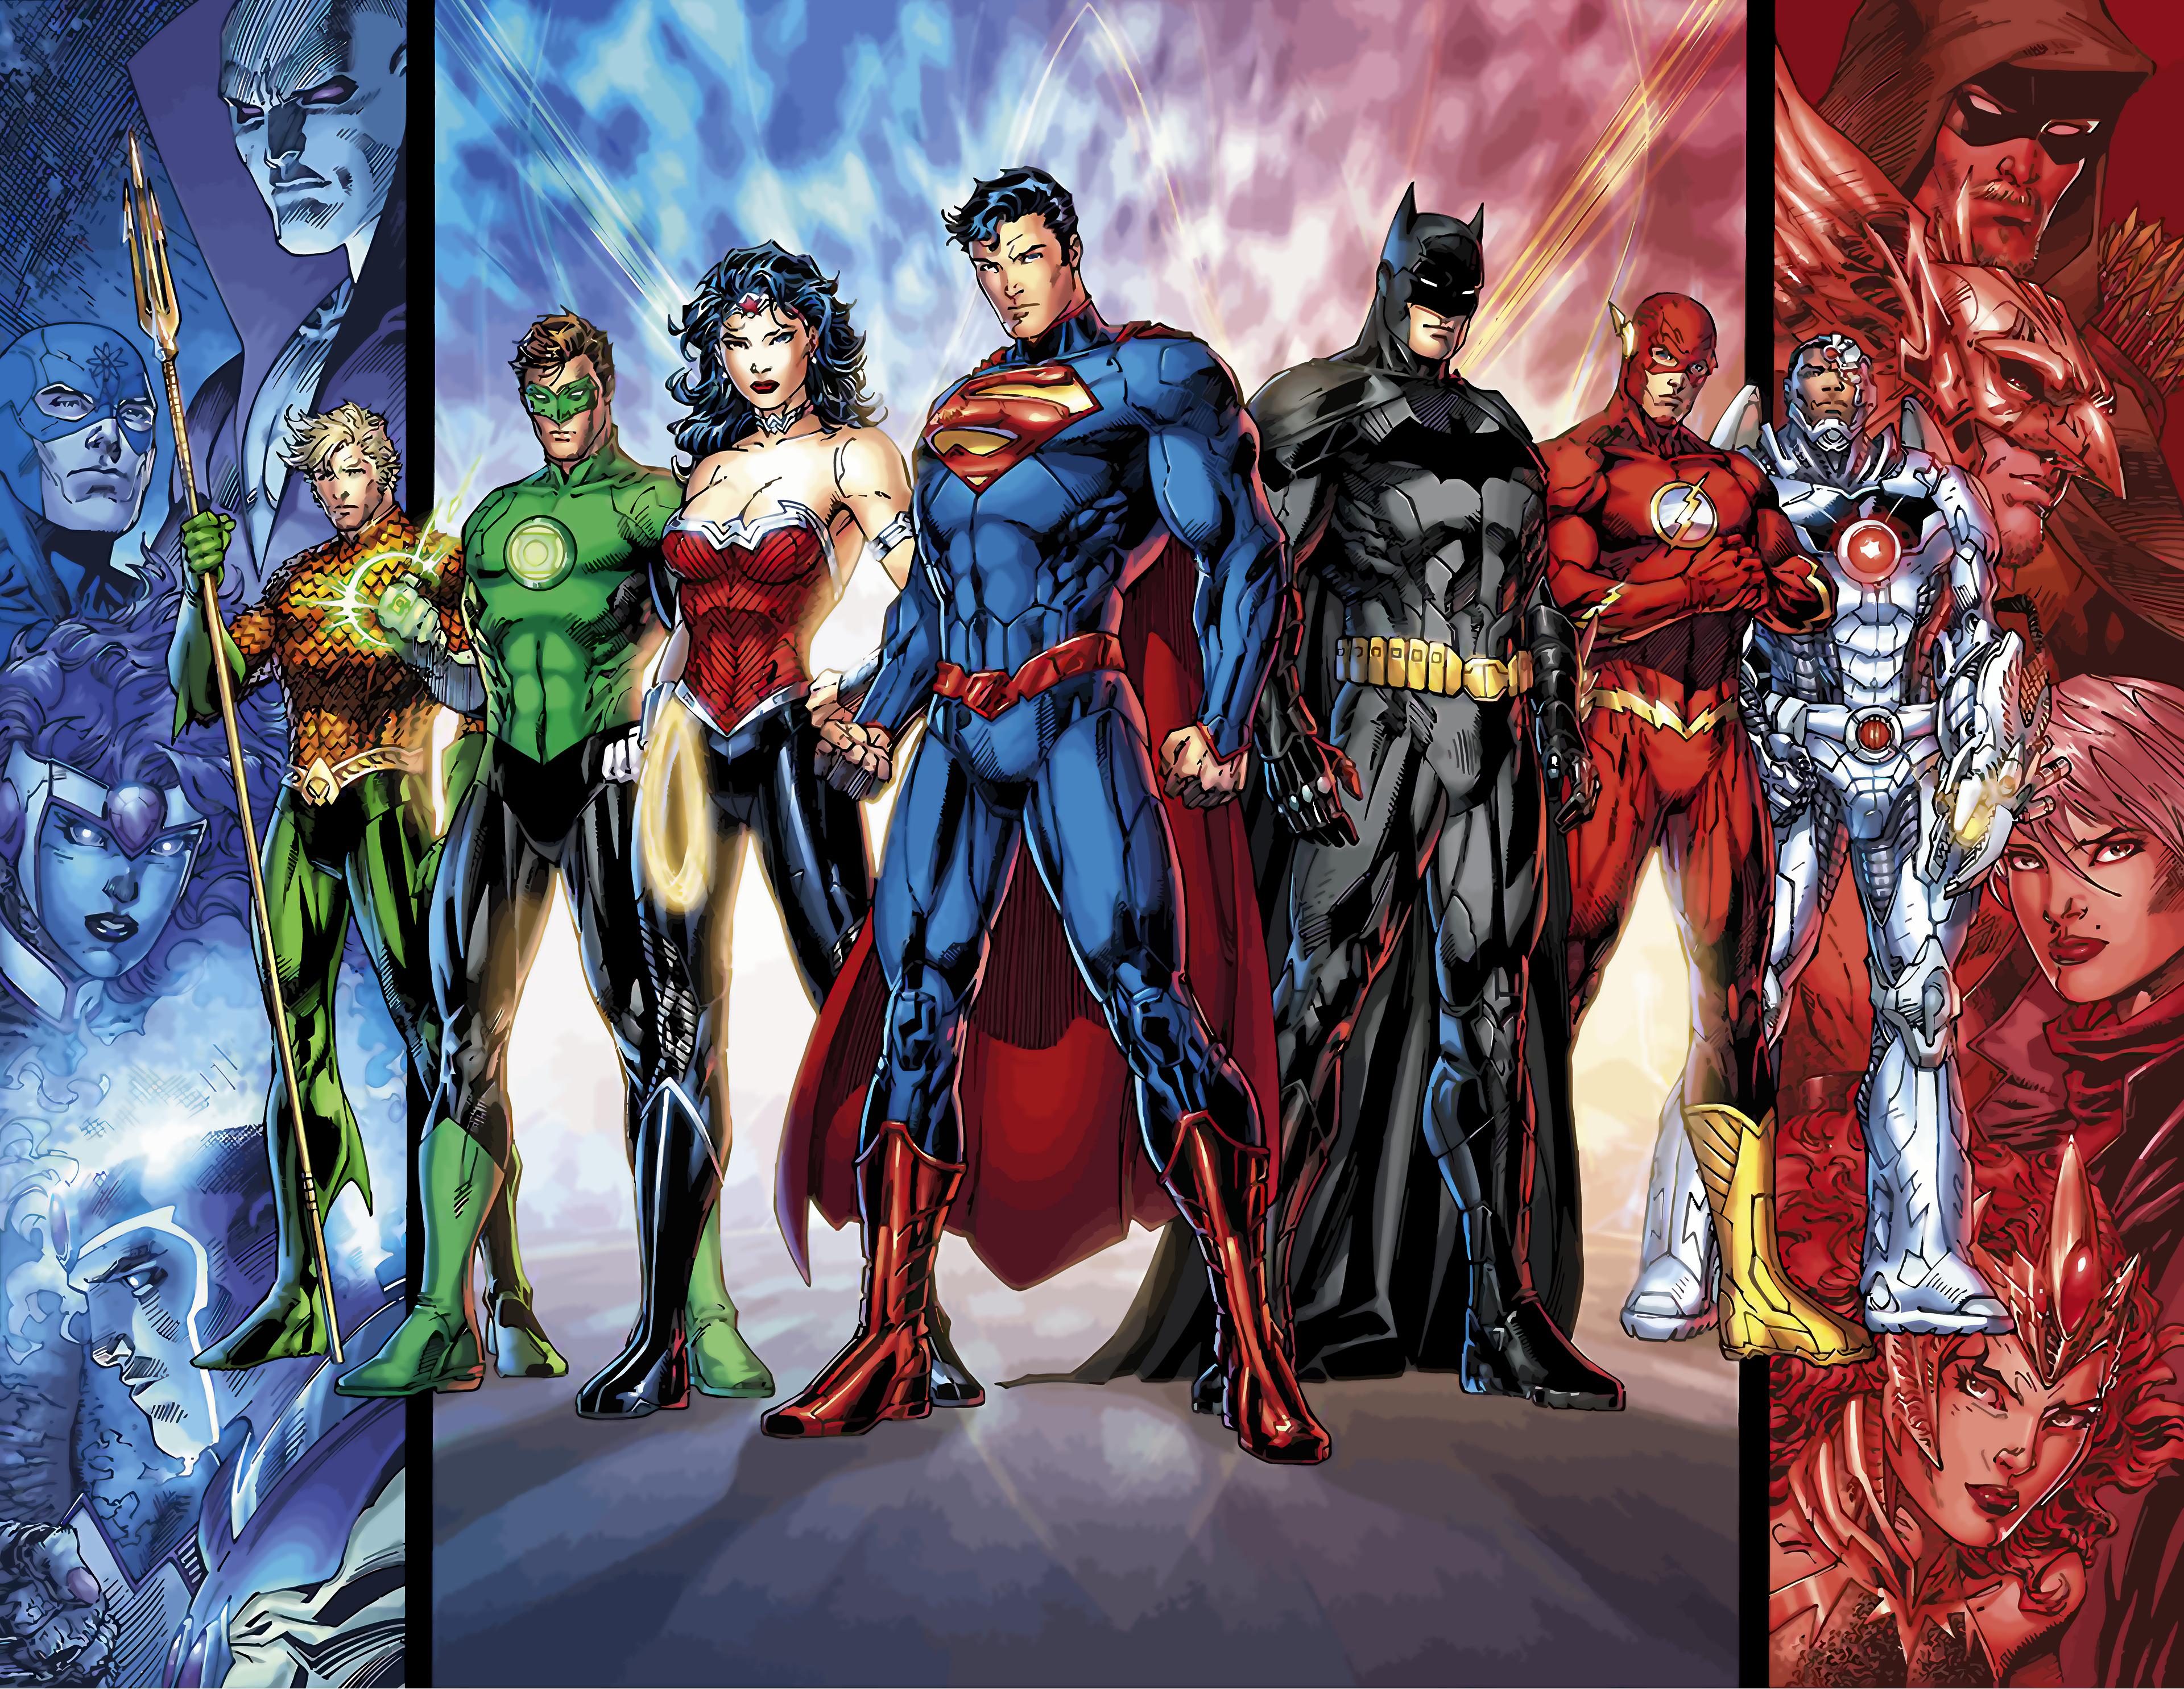 49+ DC Comics Wallpapers: HD, 4K, 5K for PC and Mobile | Download free  images for iPhone, Android